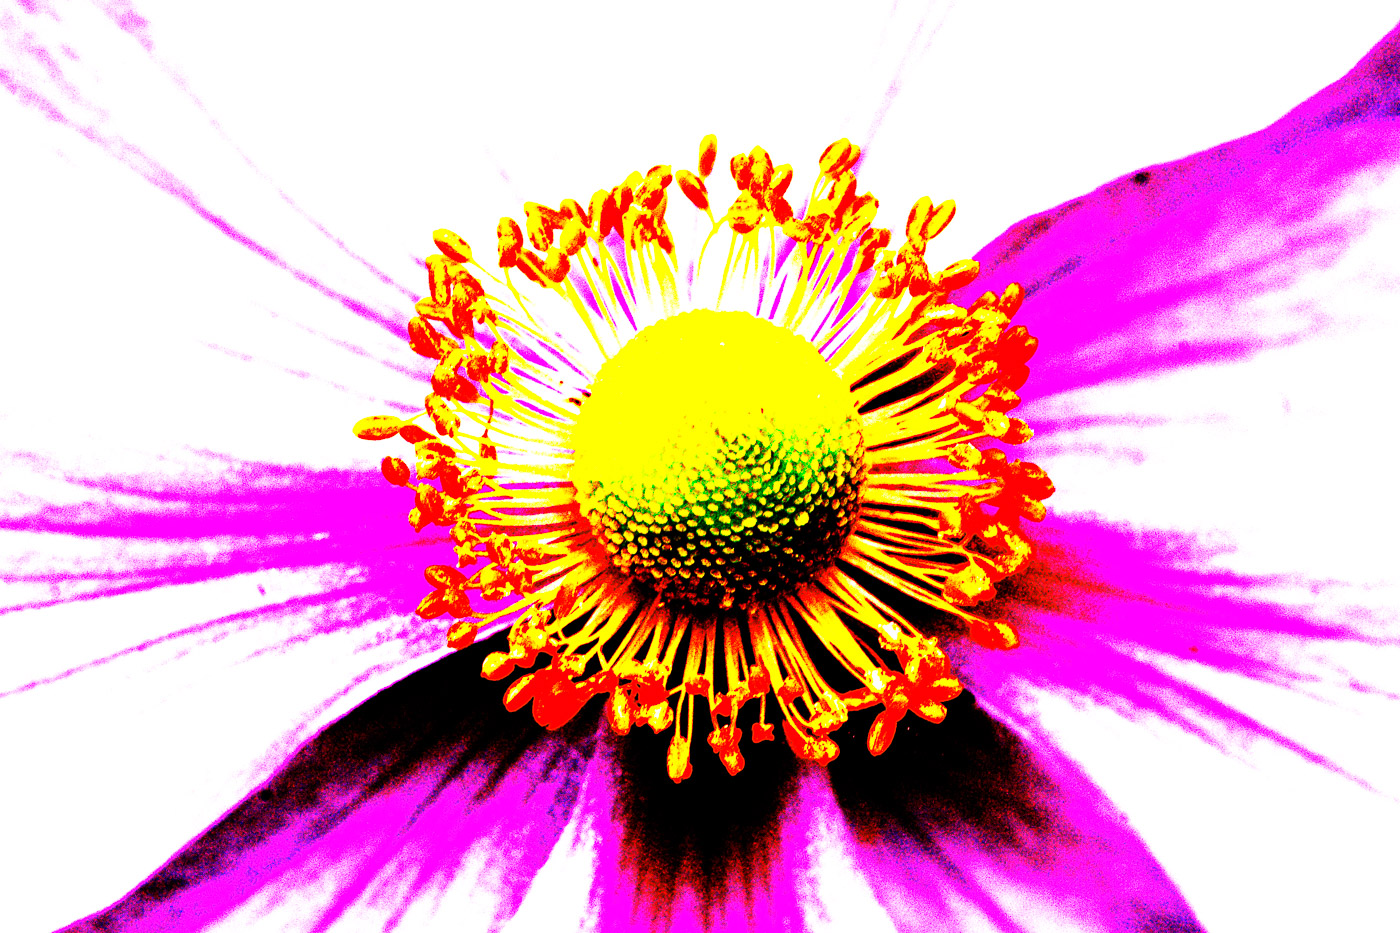 Psychedelic Japanese Anemone